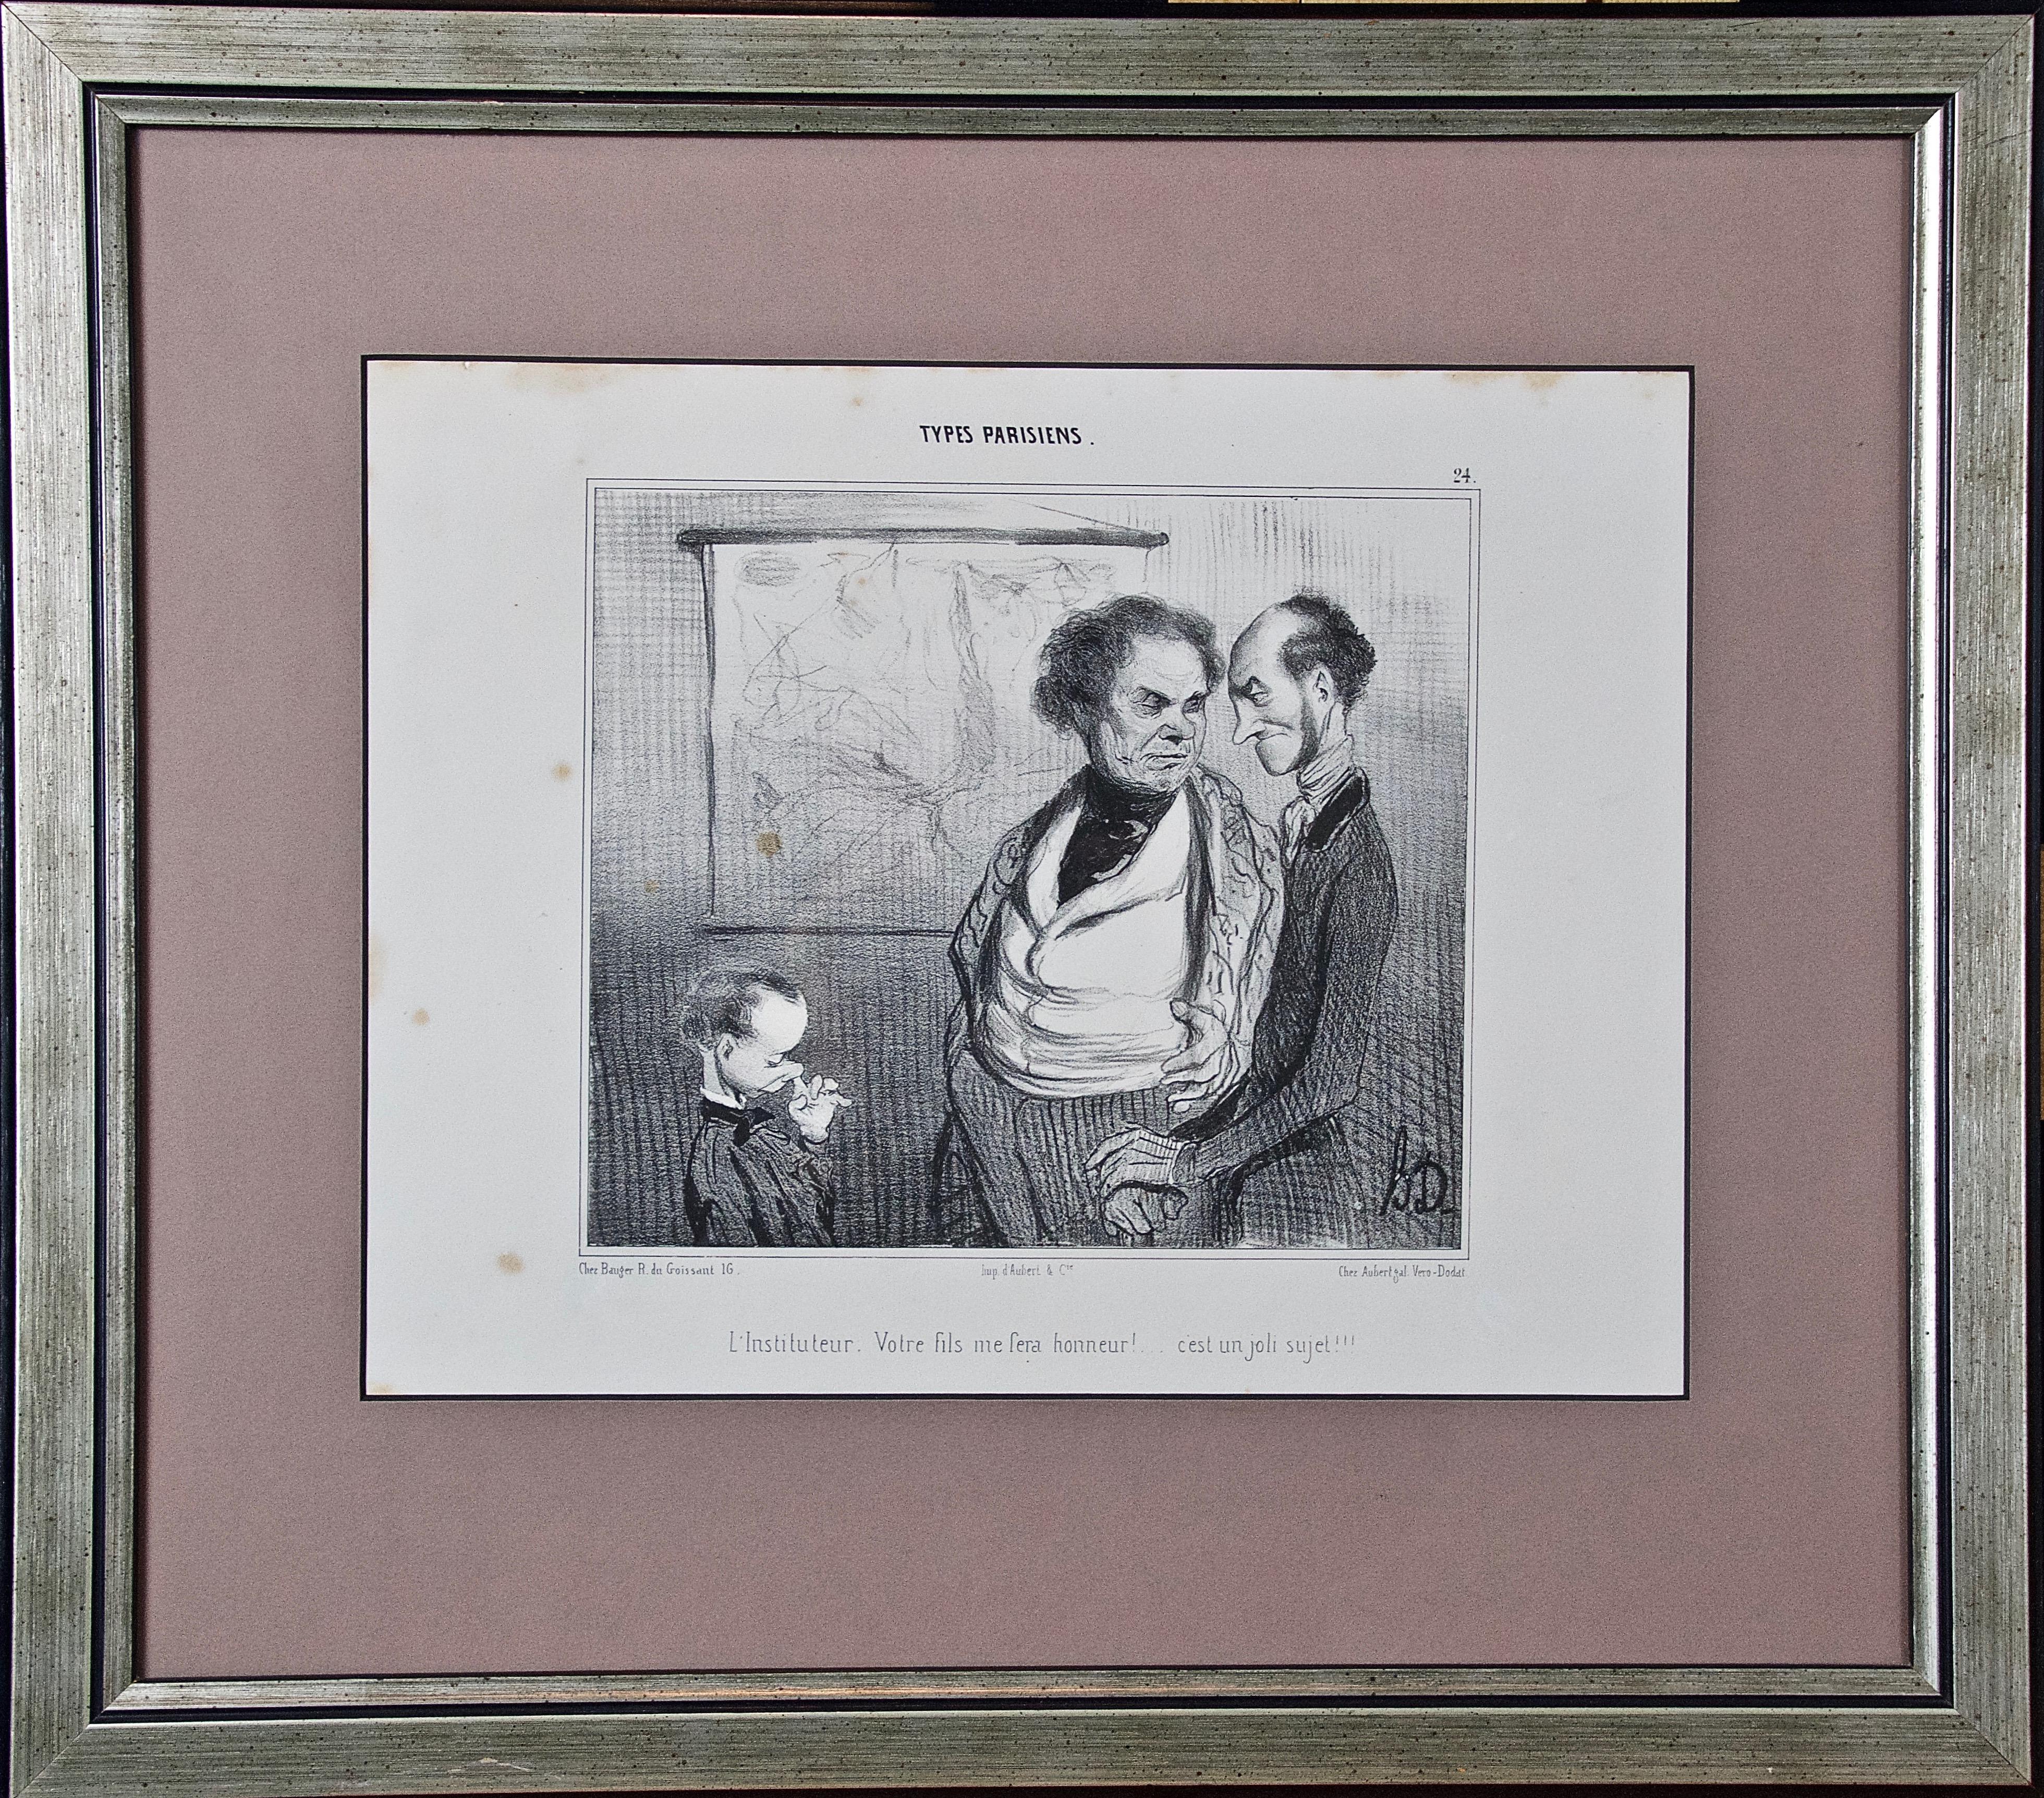 A Rare 19th Century Honore Daumier Caricature from the "Types Parisiens" Series